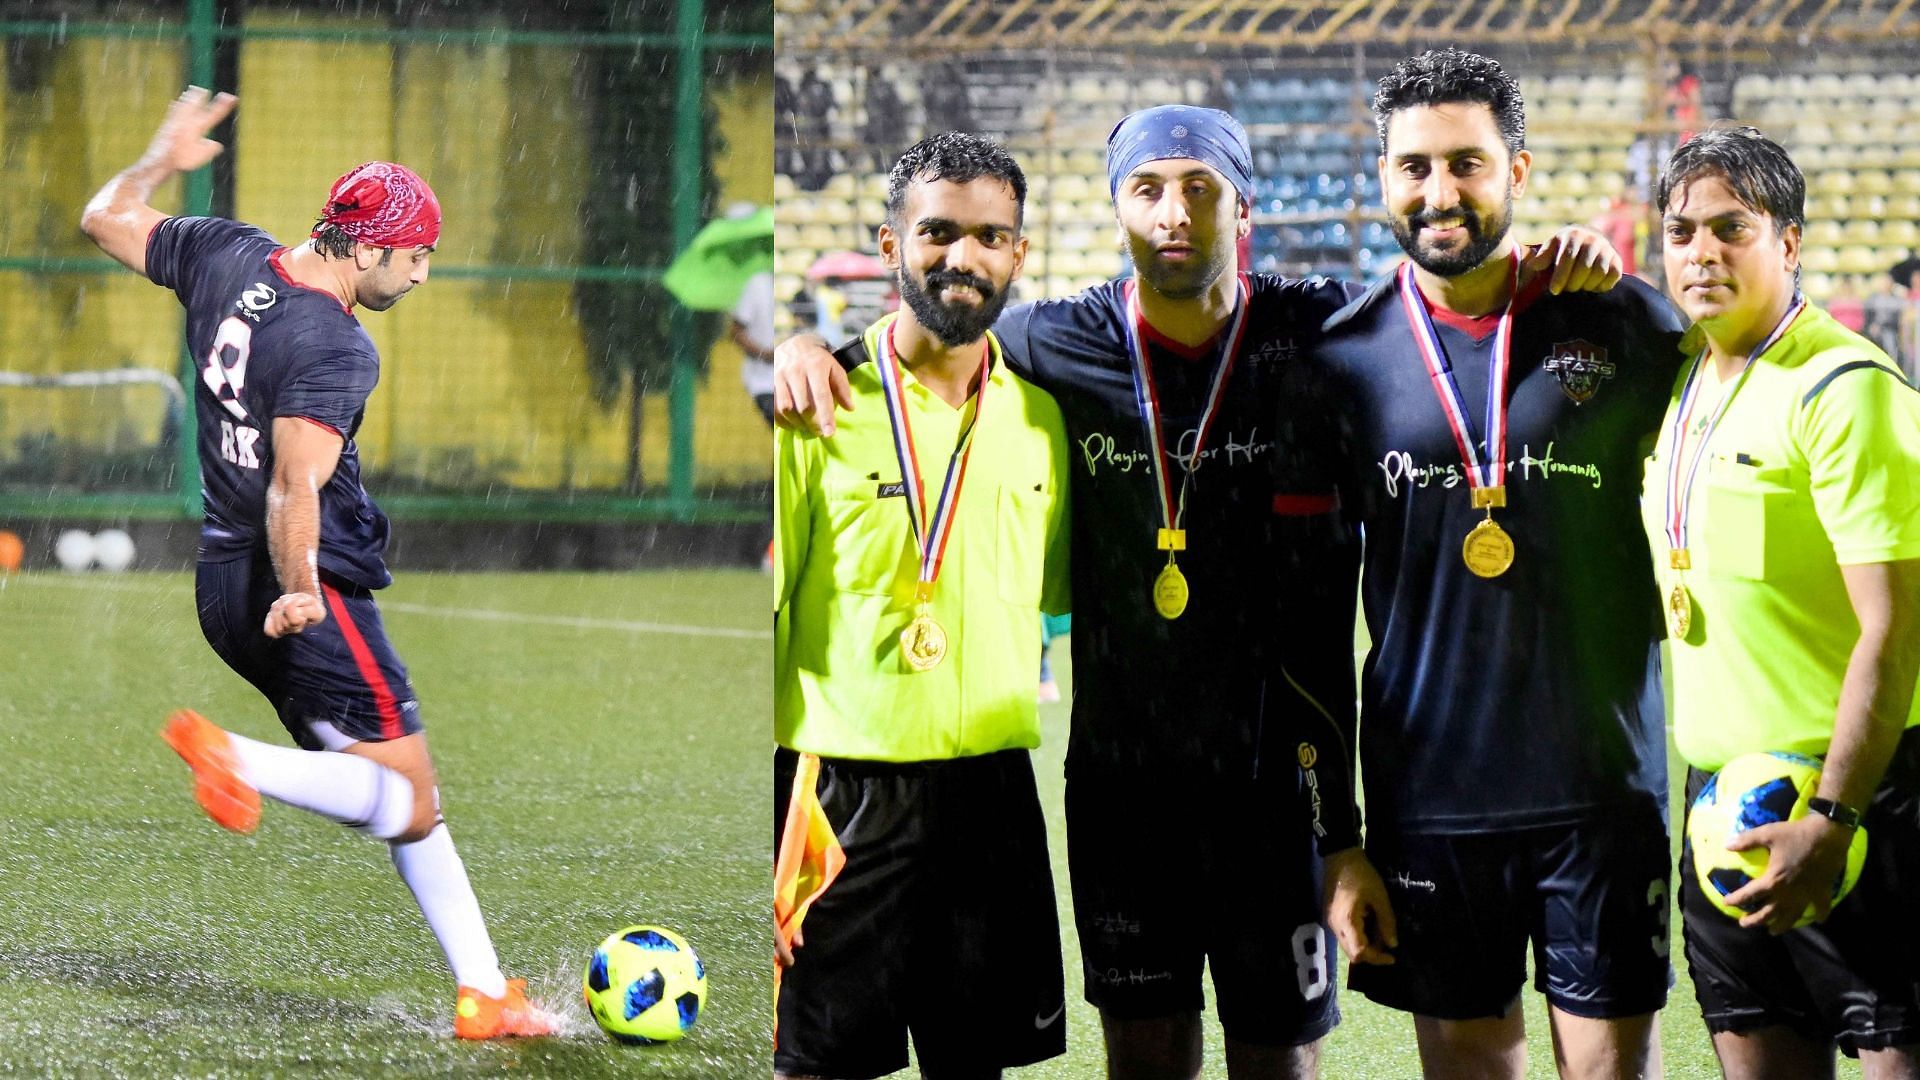 Ranbir Kapoor, Abhishek Bachchan and team Bollywood played football with the armed forces.